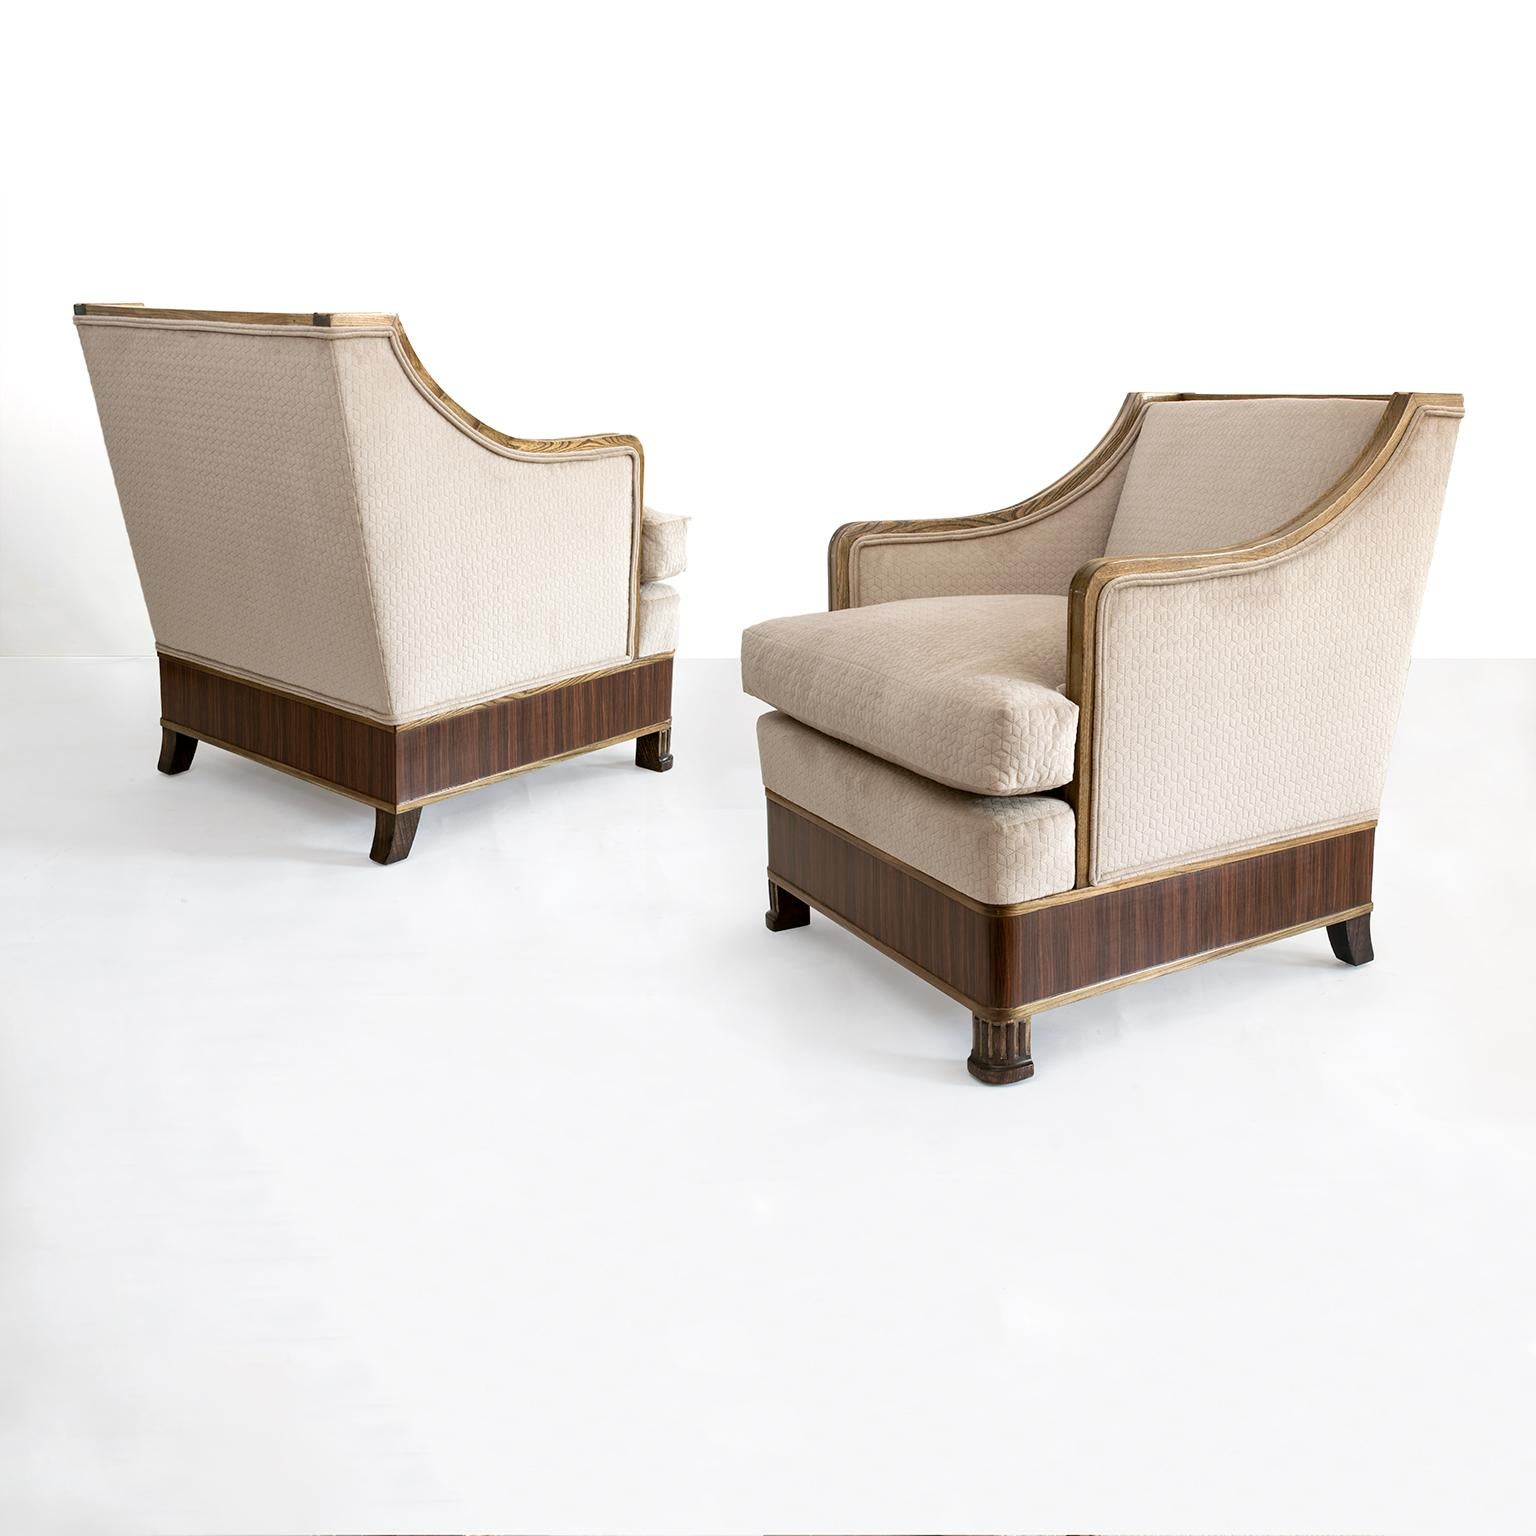 A roomy, stylish and very comfortable pair of Swedish Art Deco upholstered armchairs. Frames are carved solid elmwood with front legs in the form of a columns and a band of mahogany veneer wraps around each chair's base. Newly restored and newly